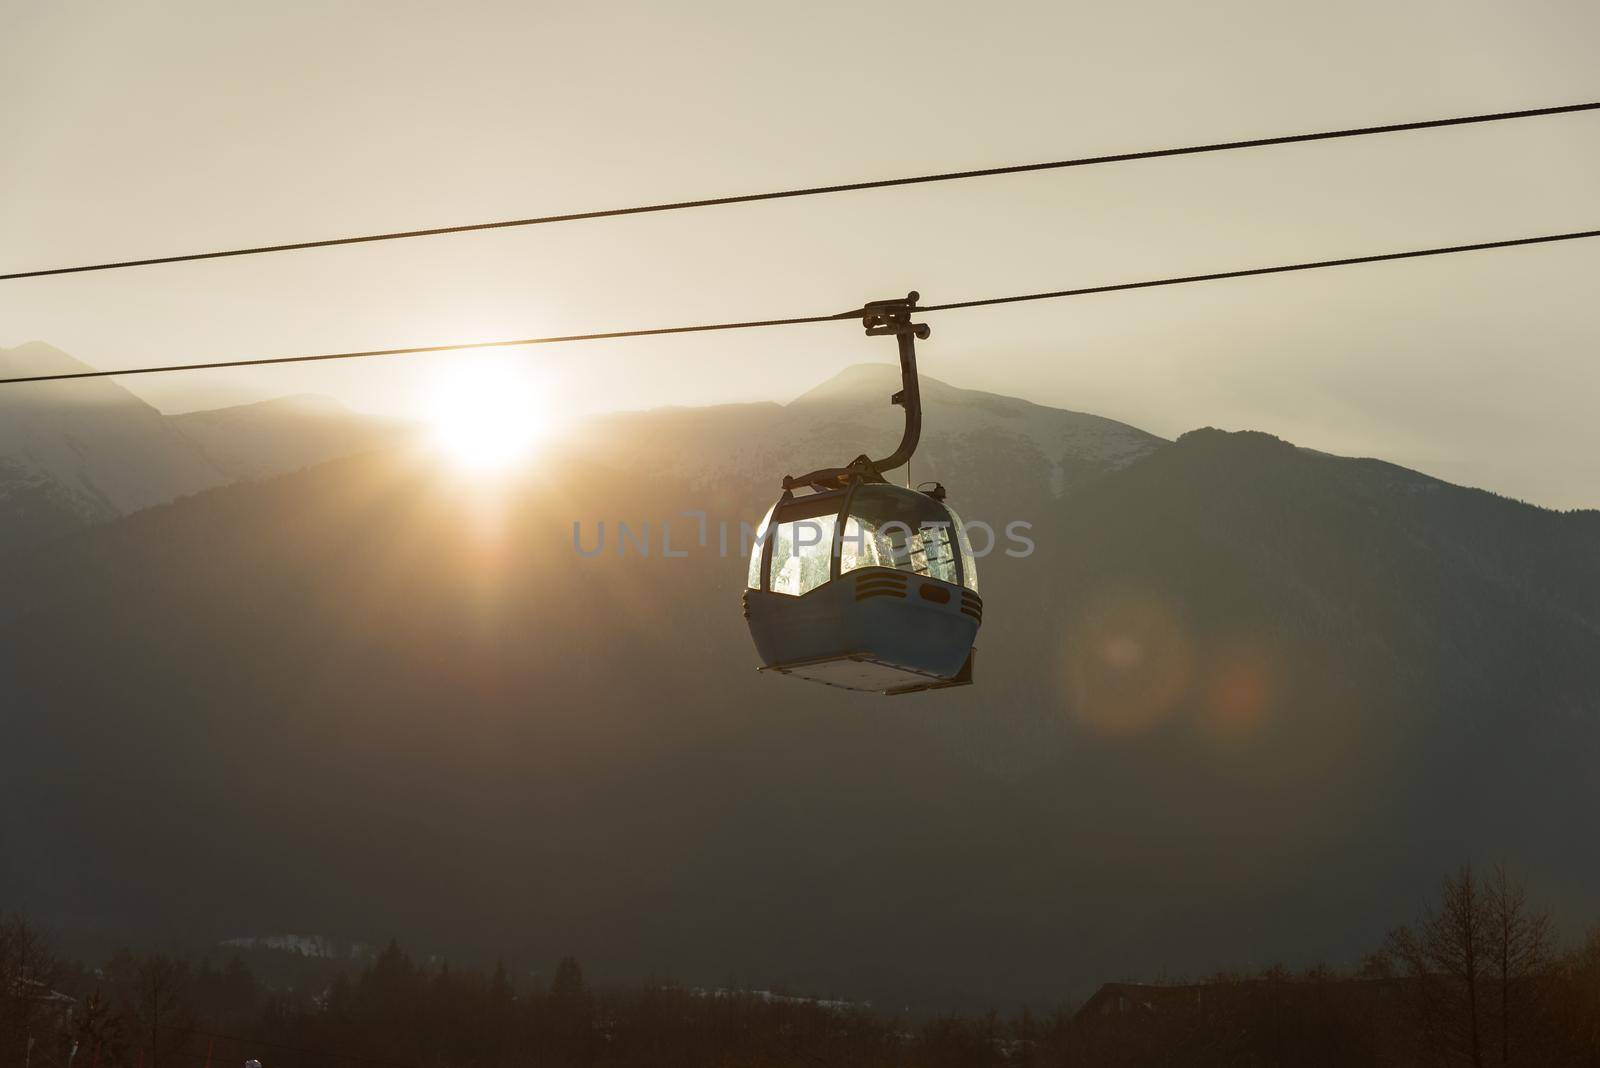 Ropeway and cable car transport system for skiers in sunset.